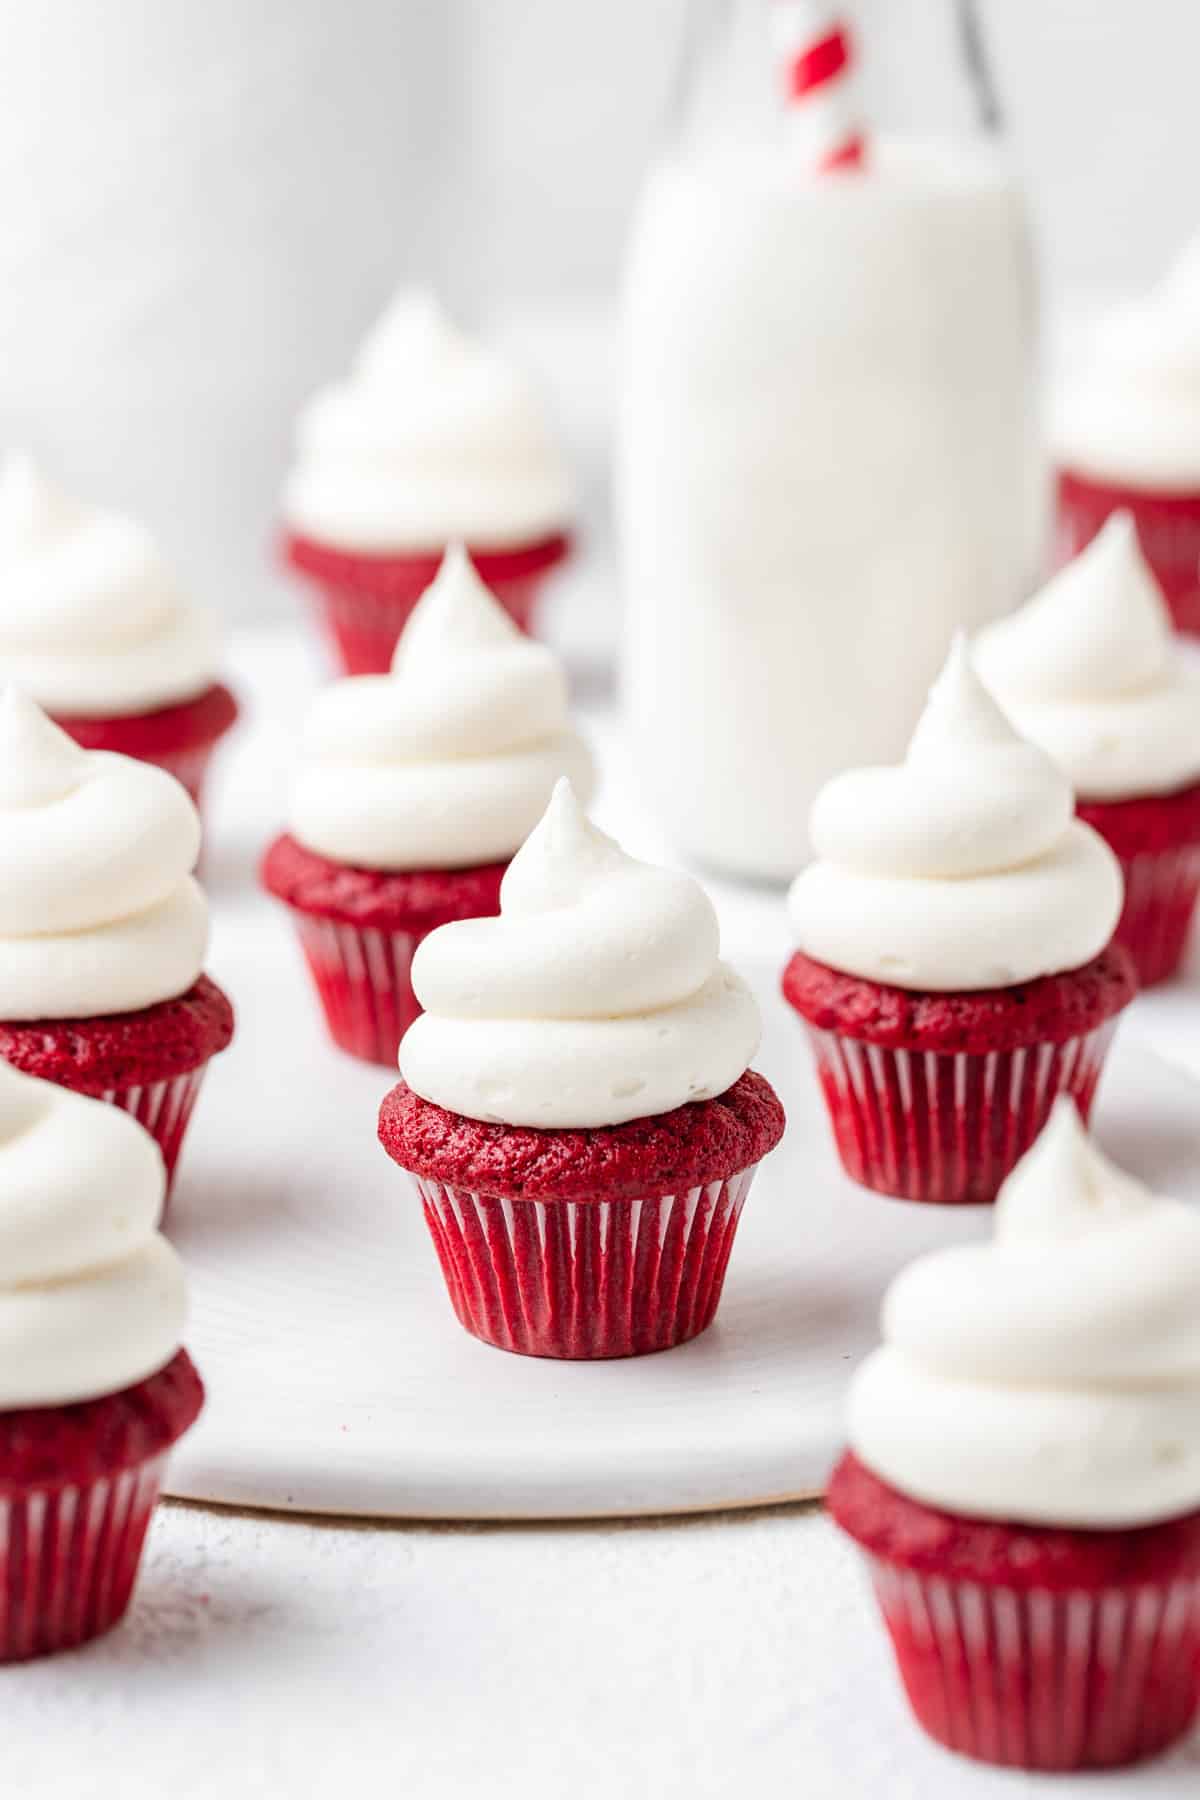 mini red velvet cupcakes with cream cheese frosting.